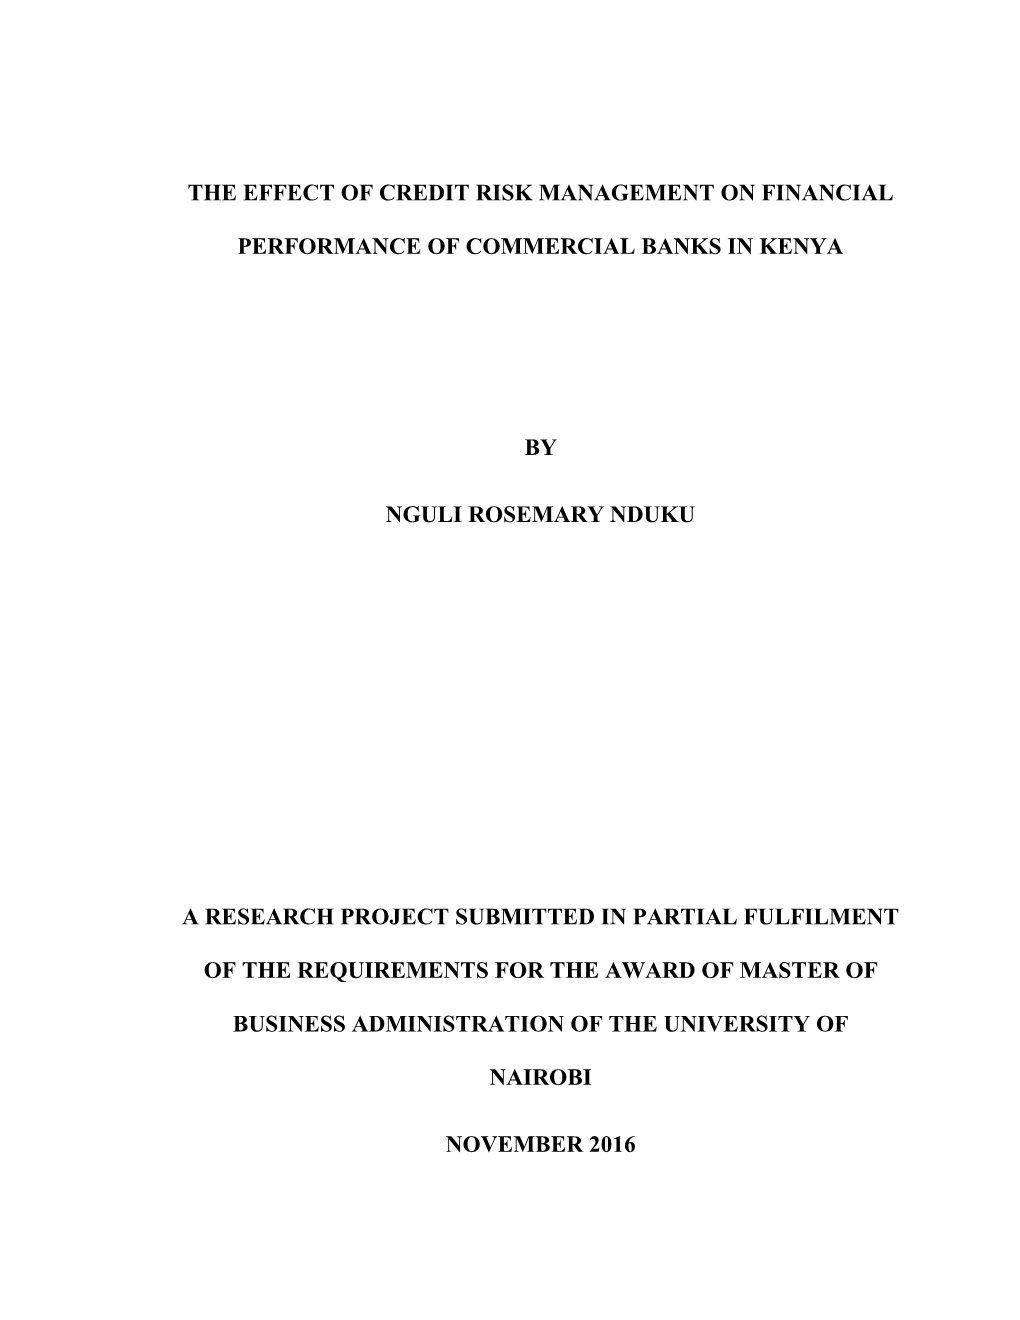 The Effect of Credit Risk Management on Financial Performance of Commercial Banks in Kenya by Applying a Descriptive Research Design